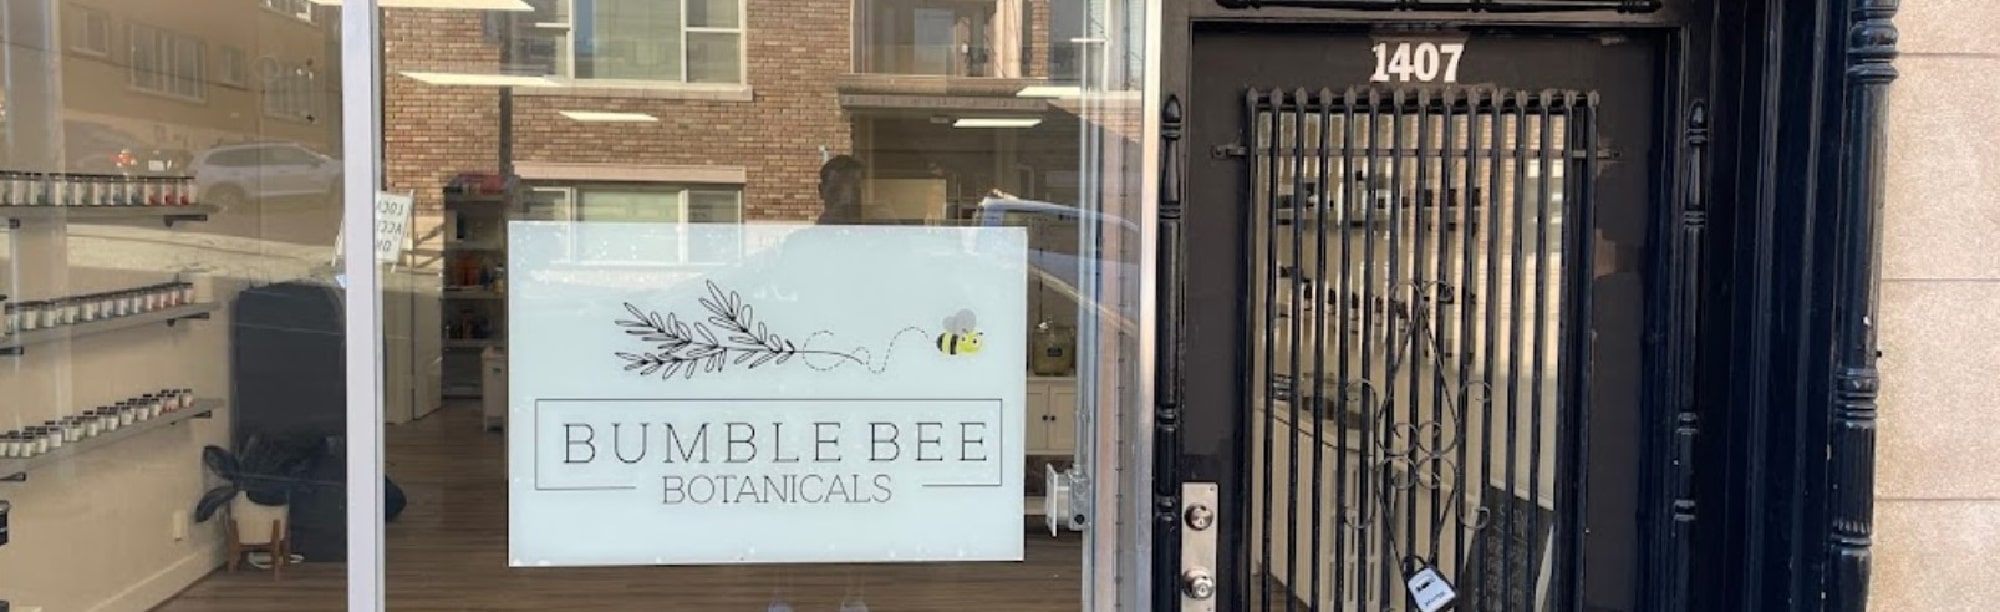 image of bumble bee botanicals in seattle wa